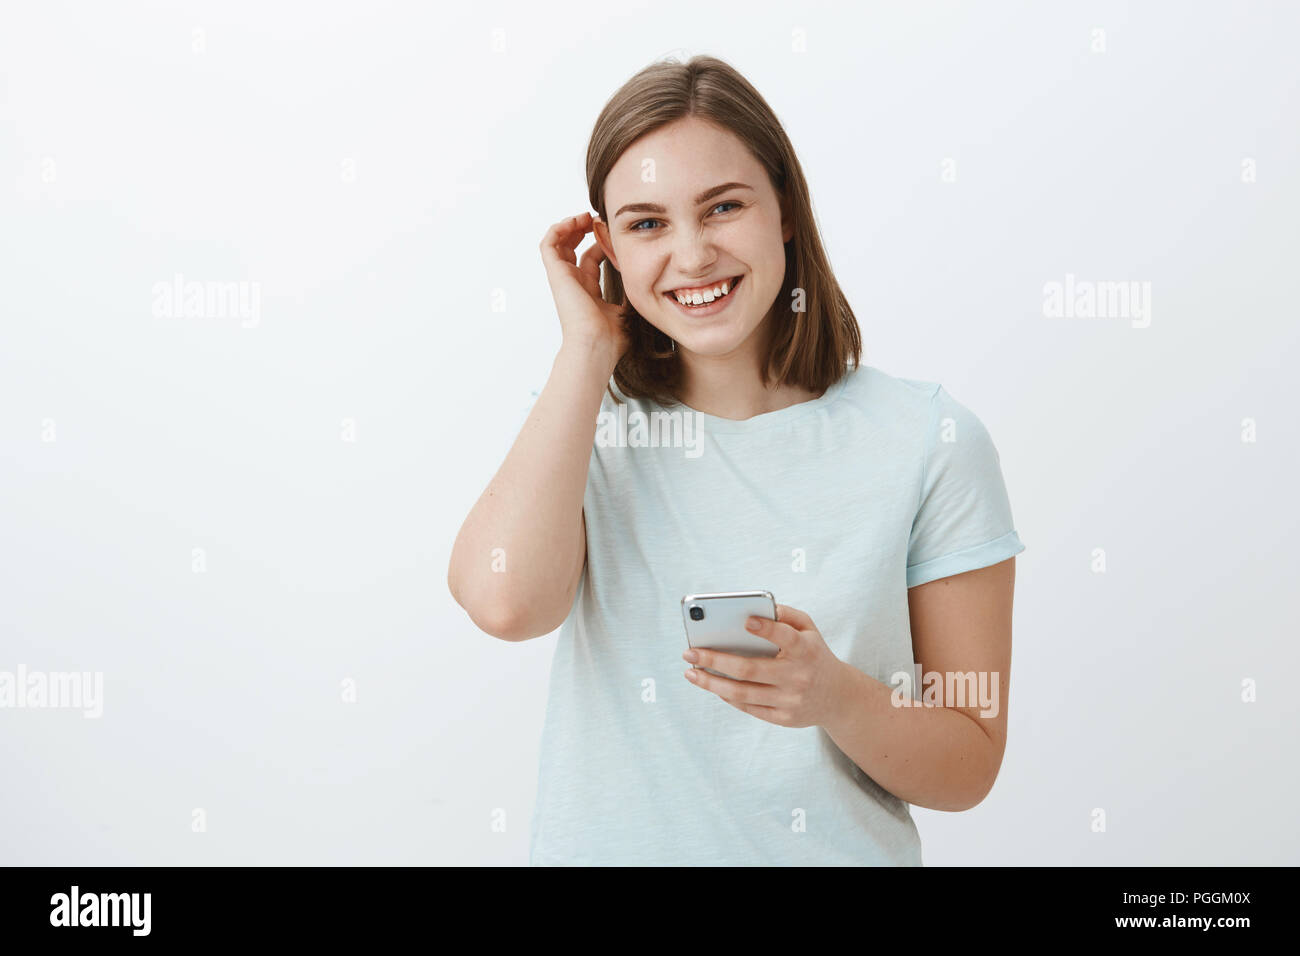 Woman exchanging numbers with cute guy on festival. Charming friendly-looking young girl flicking hair behind ear flirty and laughing while gazing at camera holding smartphone against gray wall Stock Photo